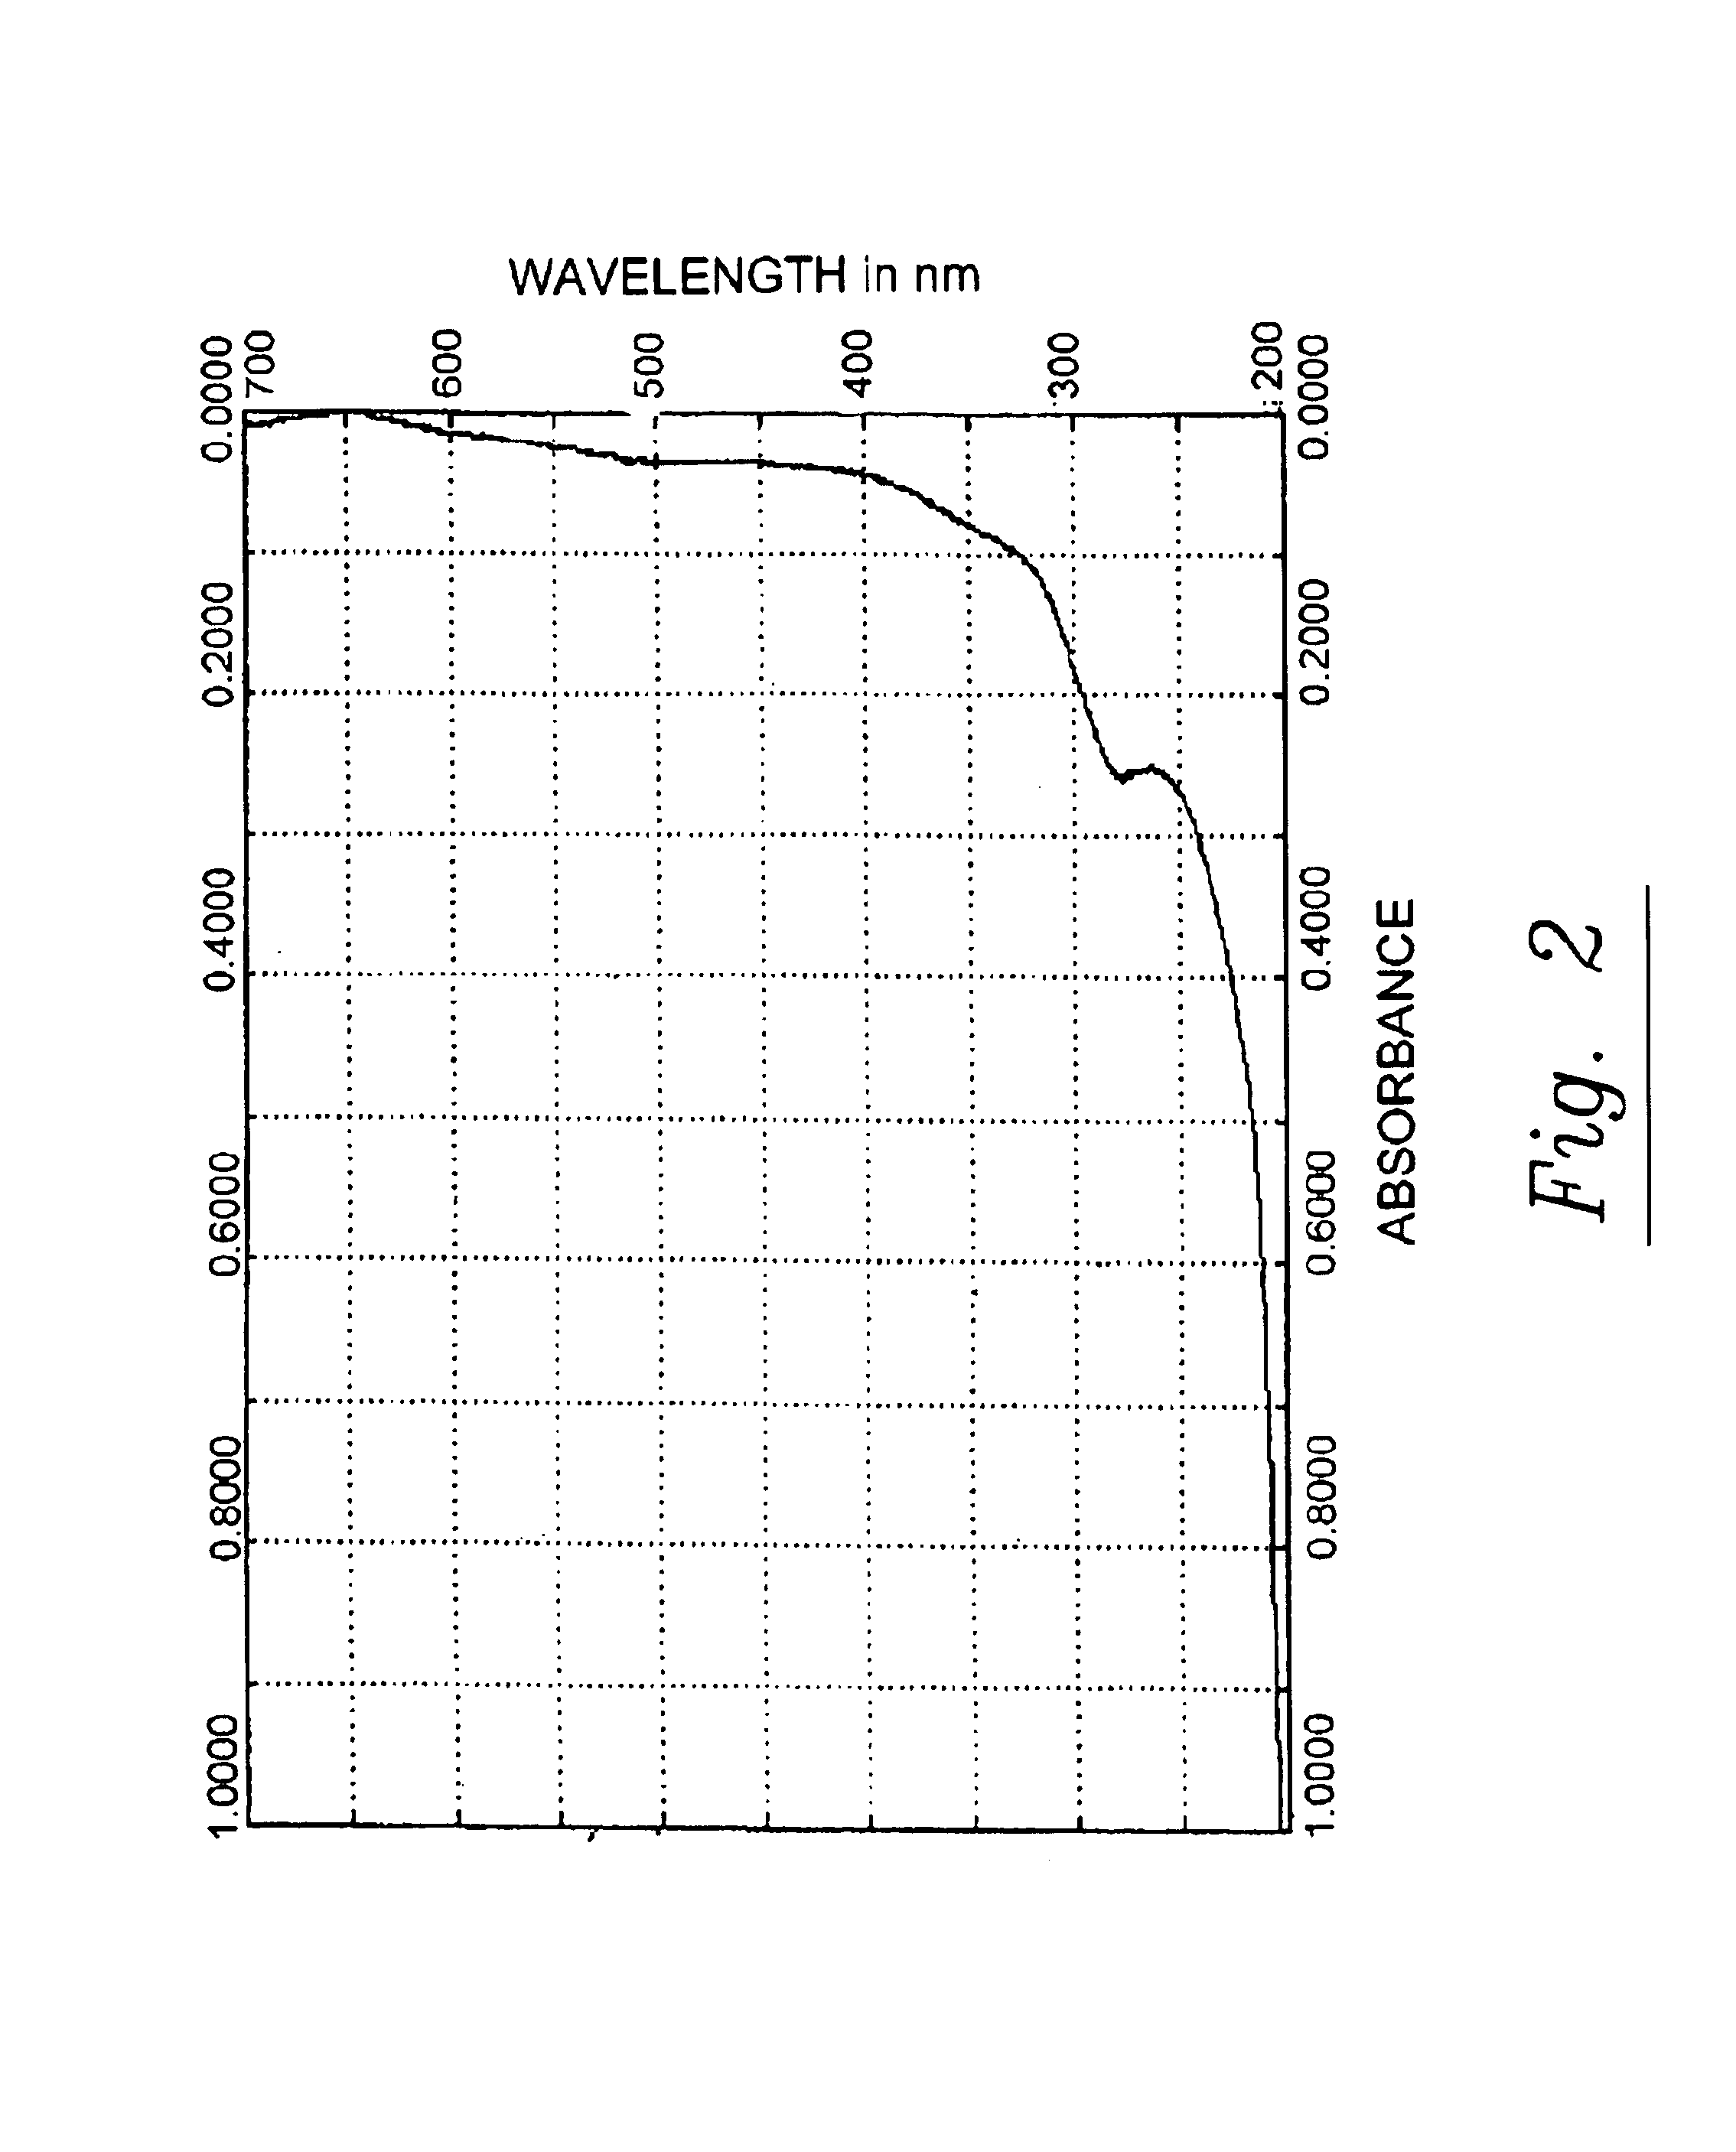 Pine cone extracts and uses thereof